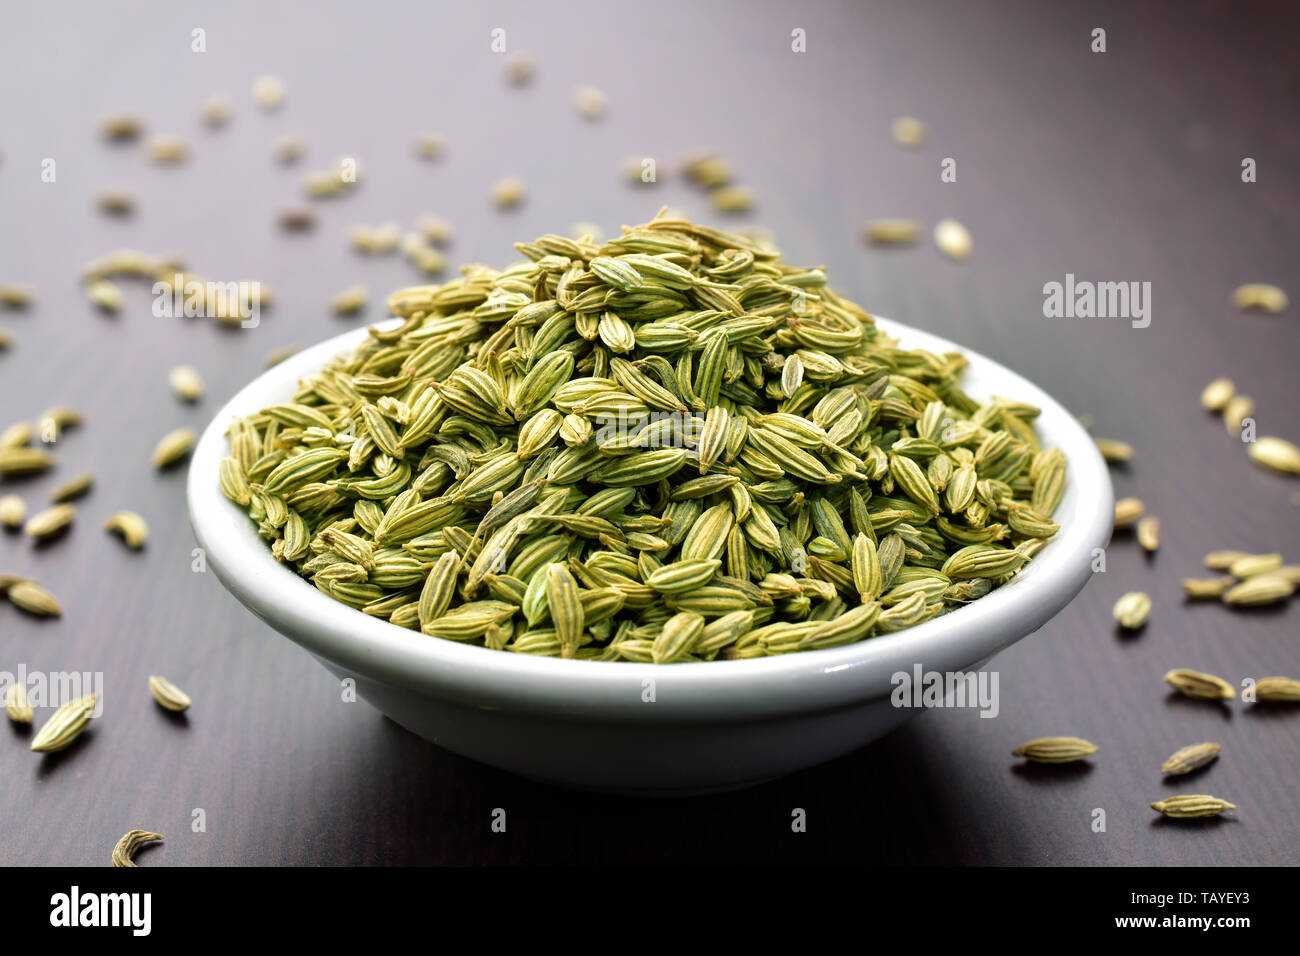 Fennel seeds in a bowl on a wooden table Stock Photo